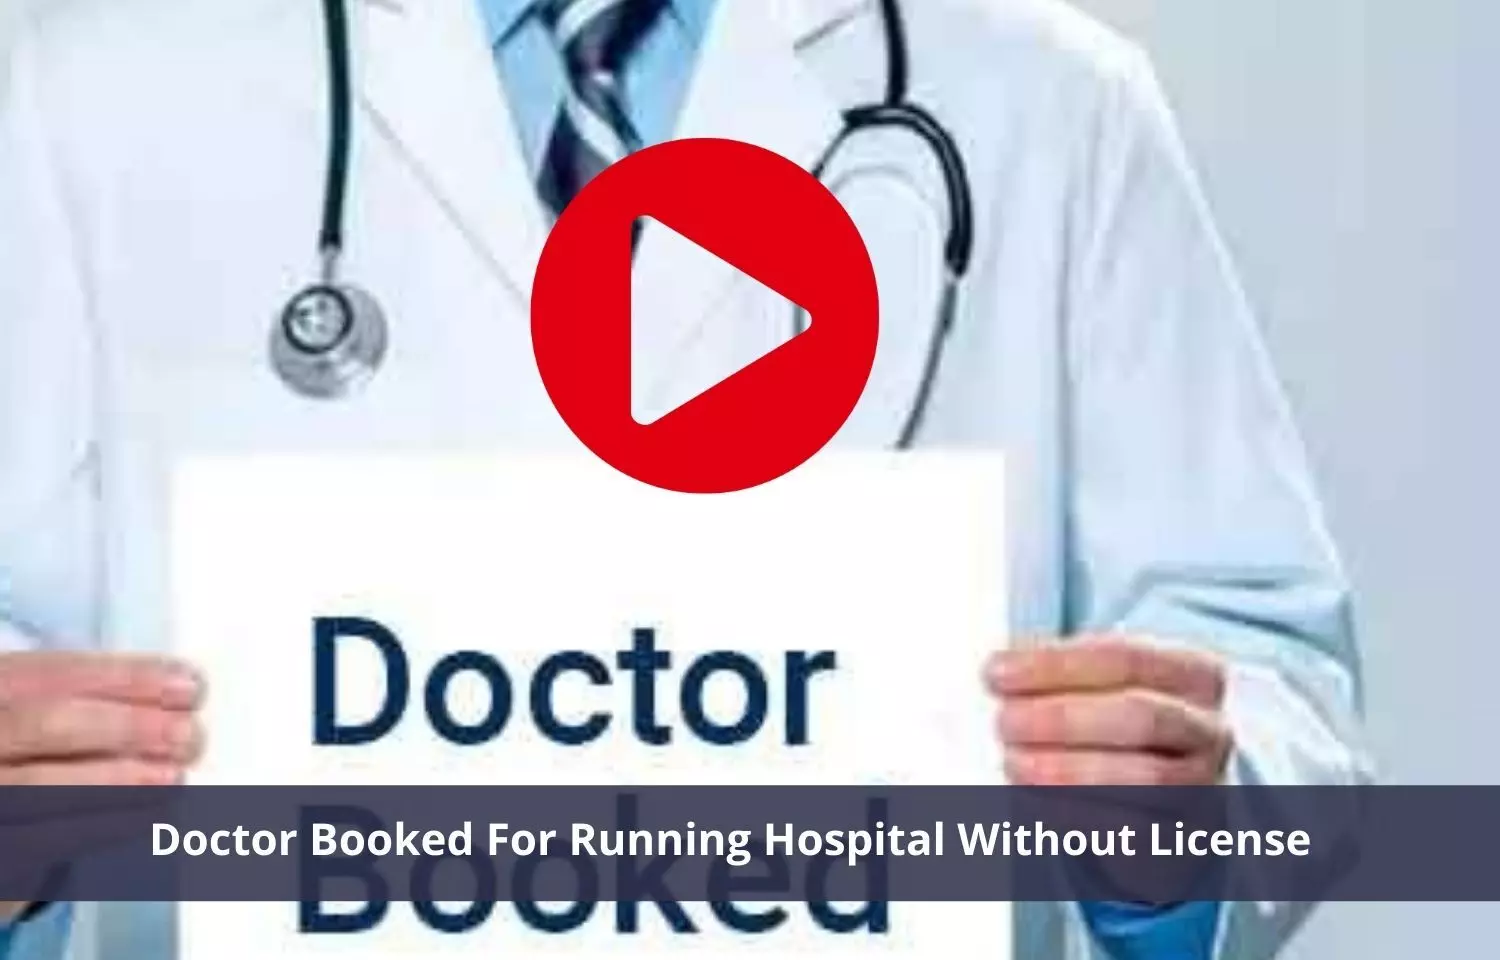 Doctor booked for running hospital without license